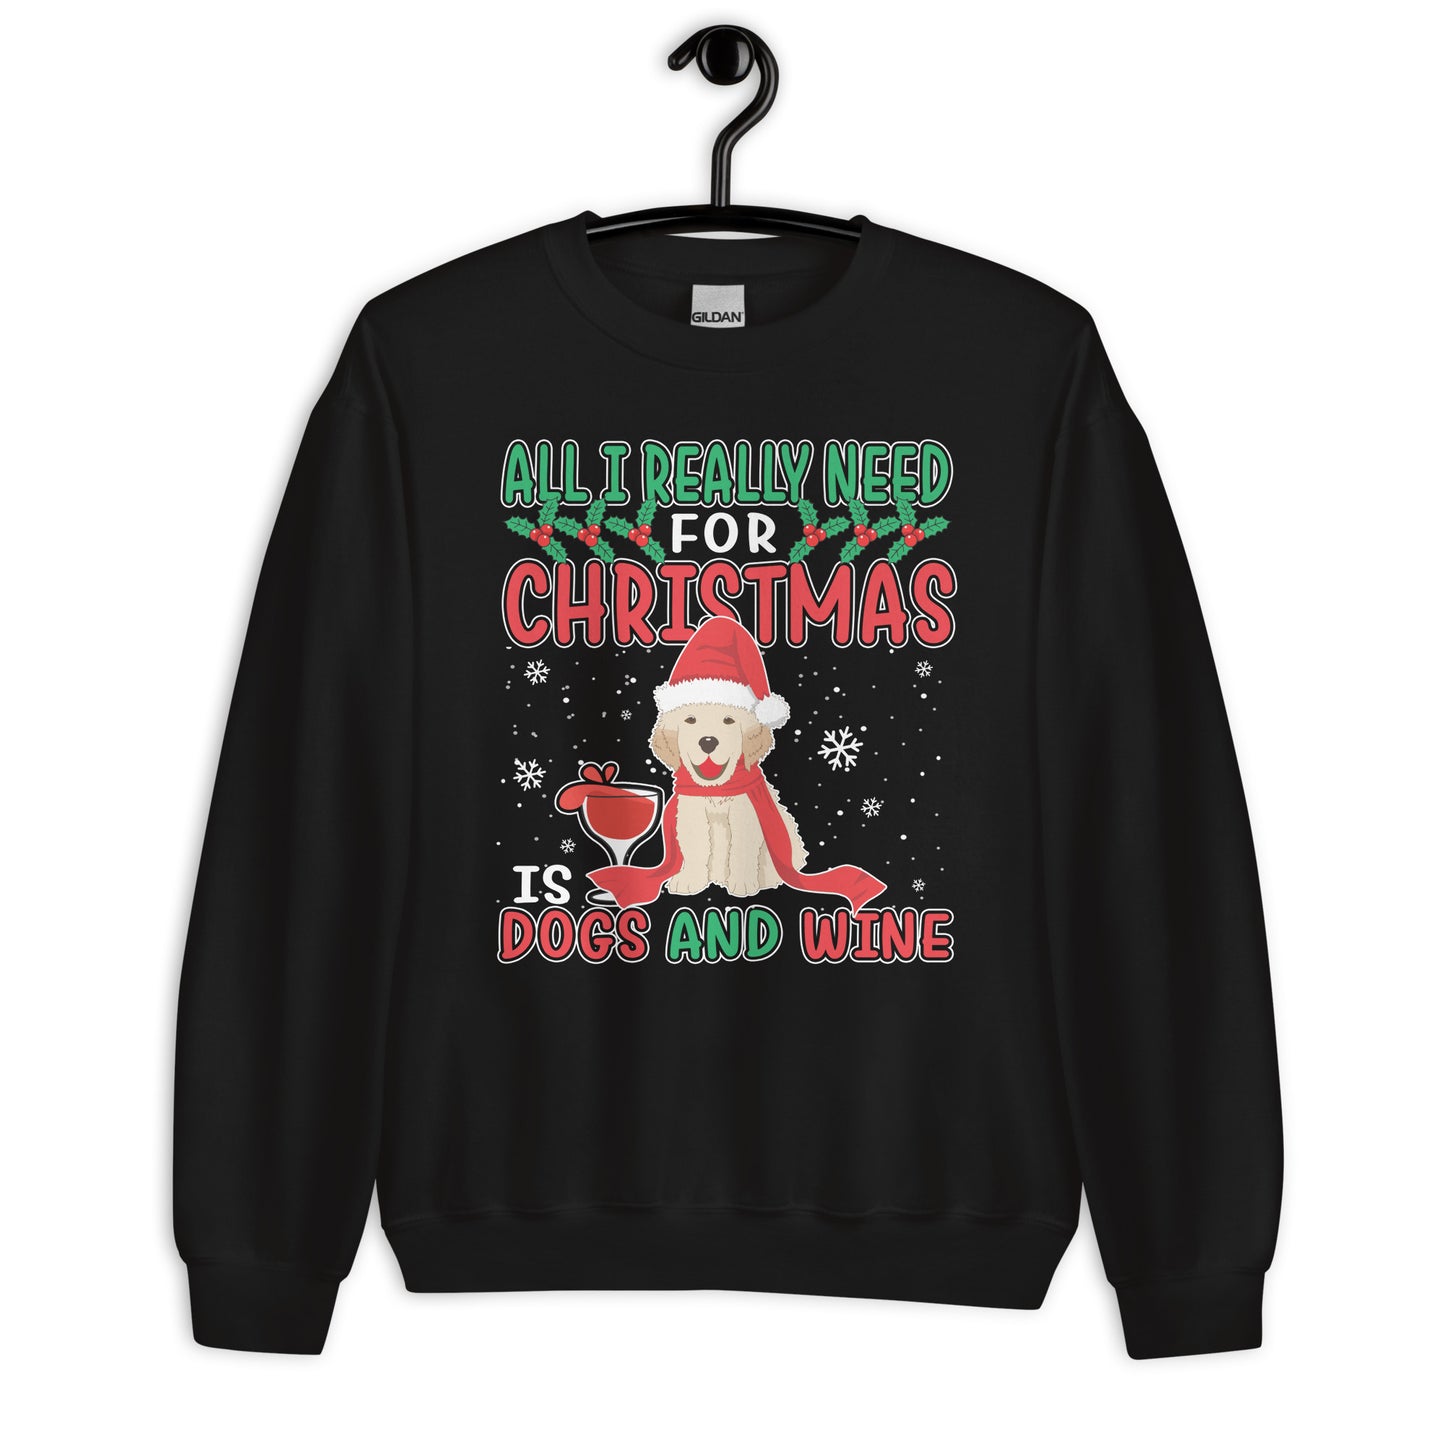 All I Want for Christmas is Dogs And Wine Ugly Christmas Sweatshirt